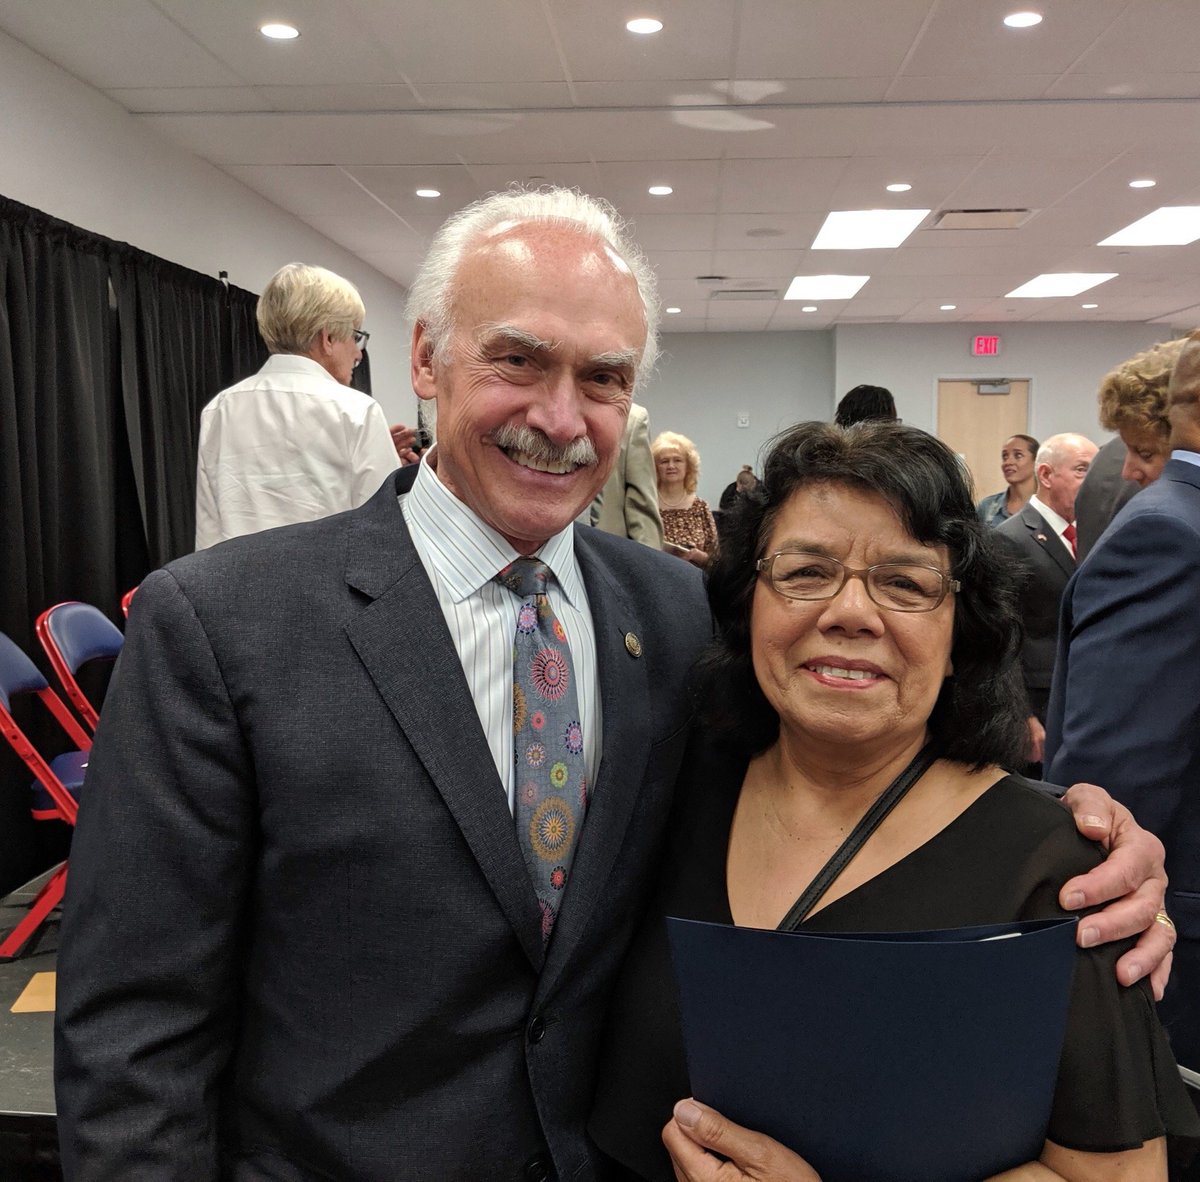 Jessie received the Air Force Commendation Medal for Meritorious Service & the WAF (Women in Air Force) Top Cat Award. Upon returning home, she continued public service for 30+years at  @SocialSecurity. She is now retired & lives in Mt. Lebanon. Jessie, thank you for your service!